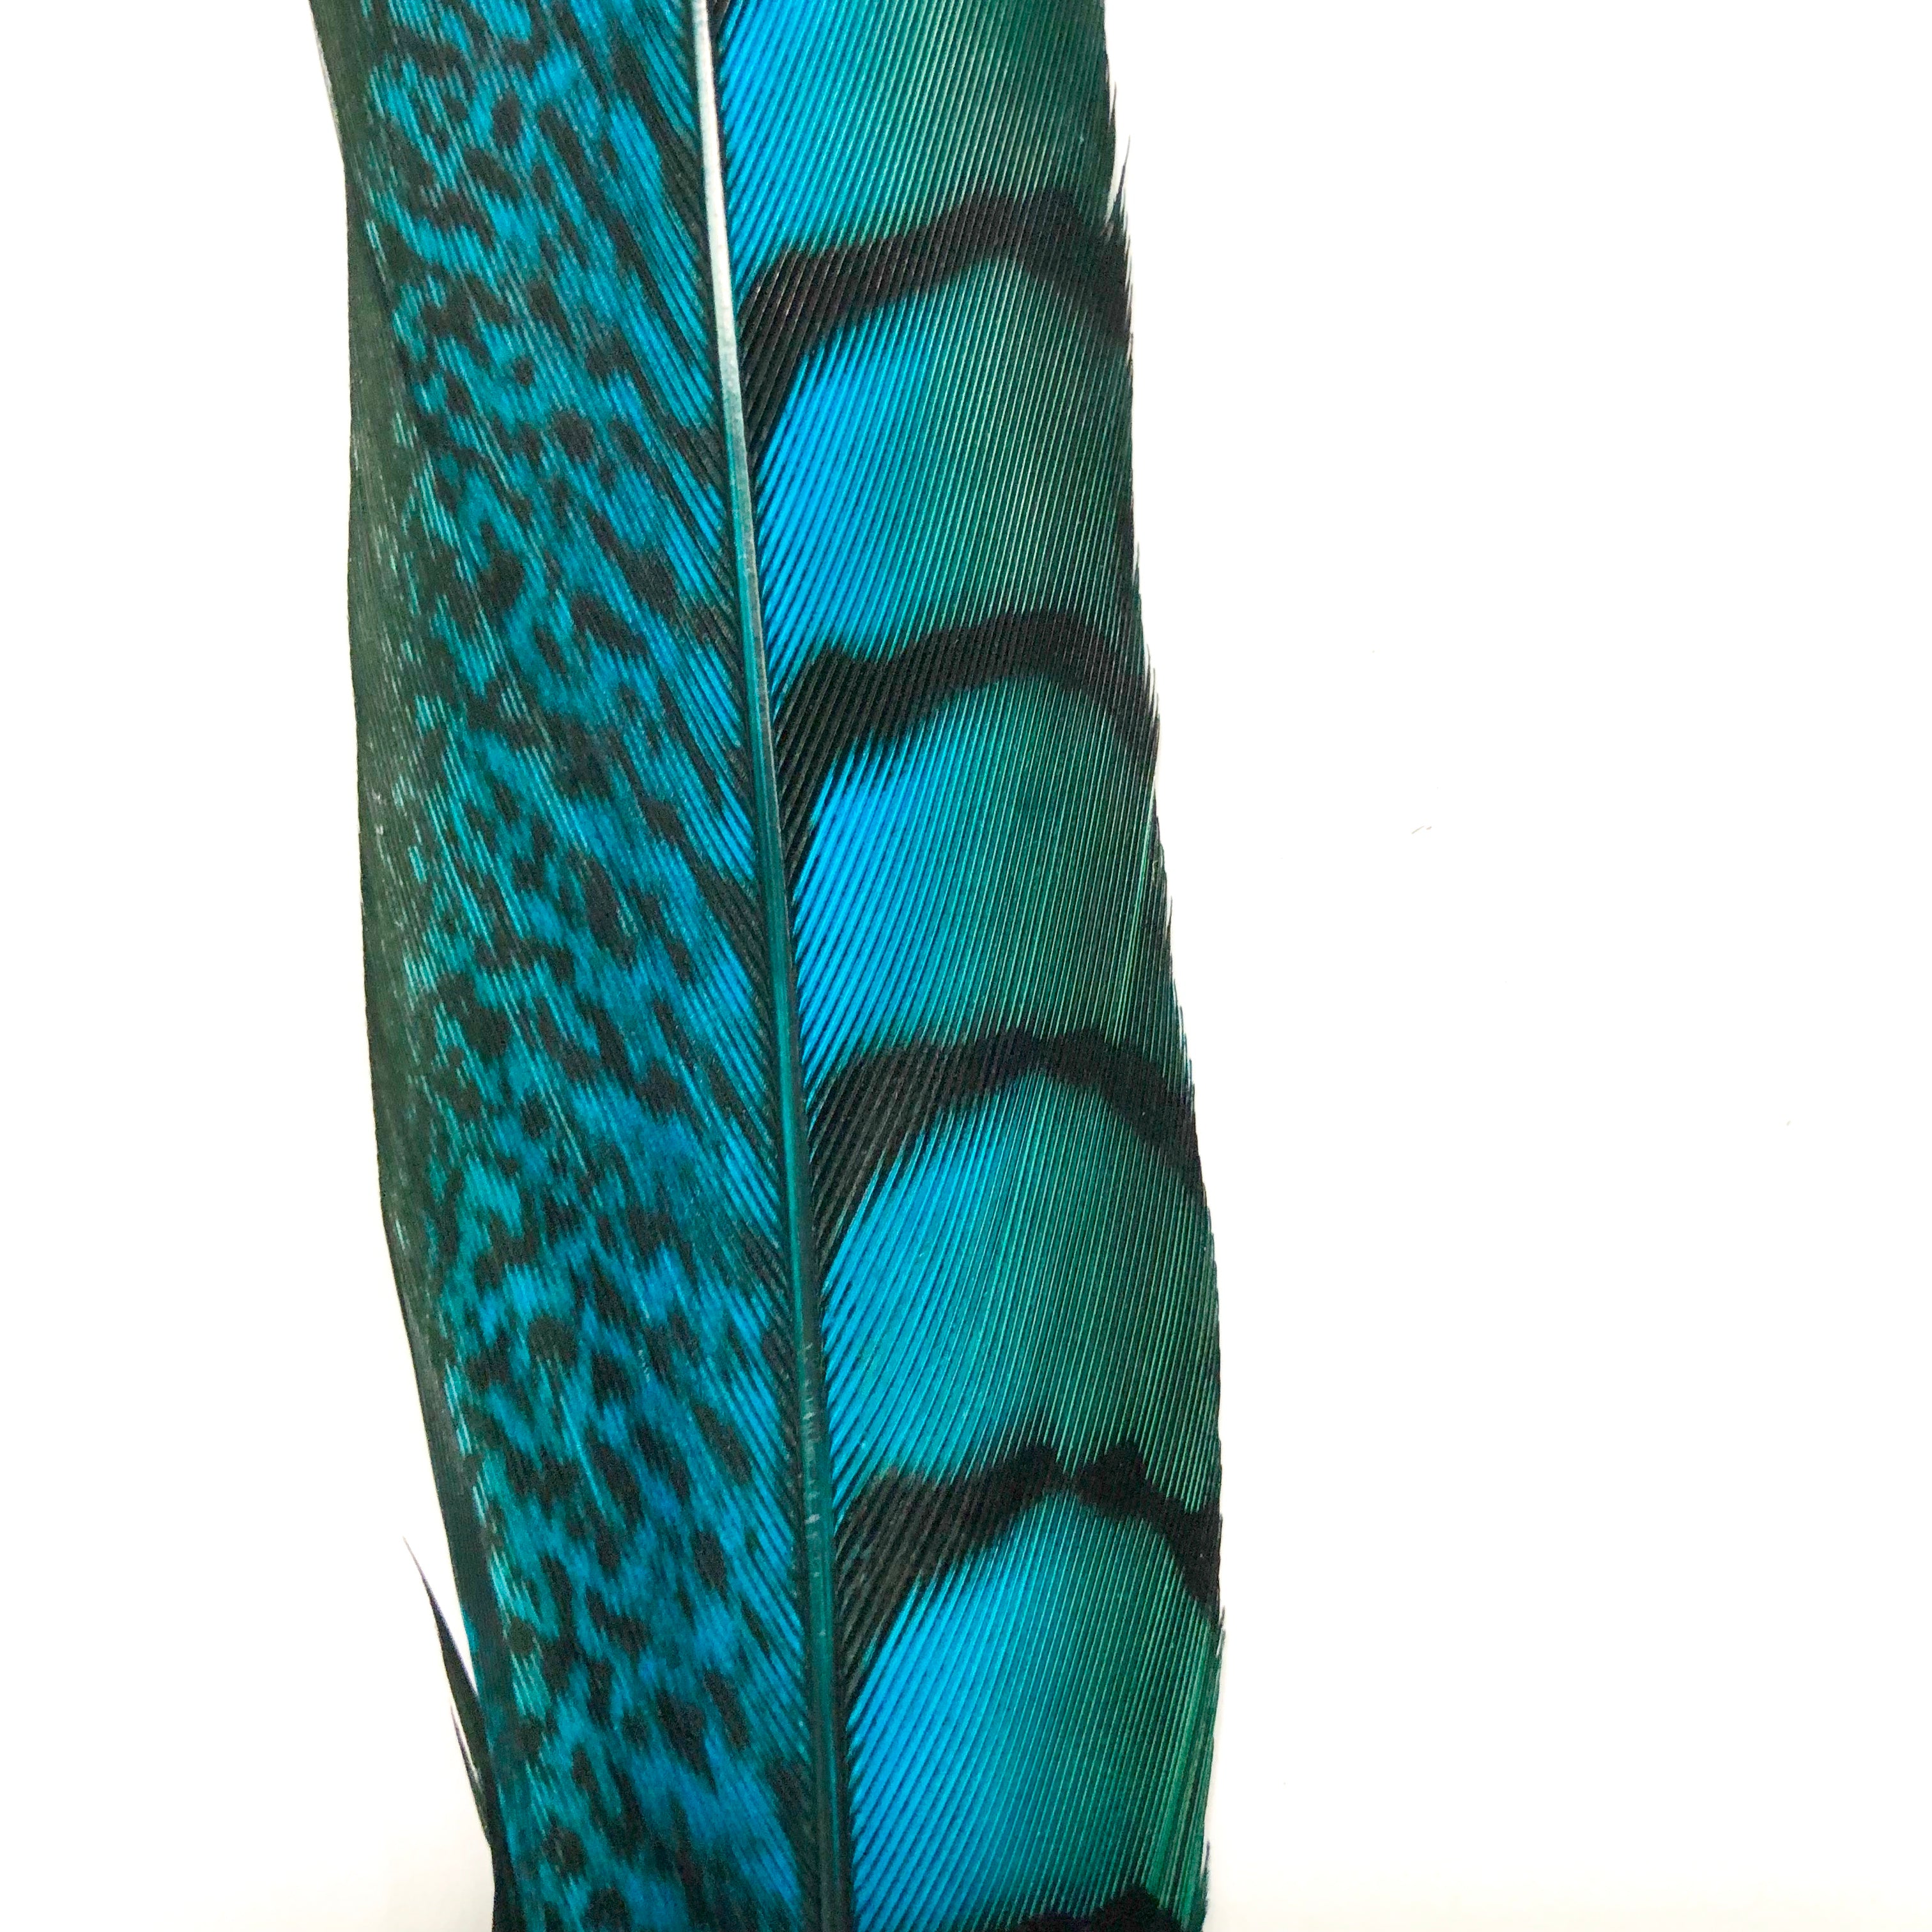 10" to 20" Lady Amherst Pheasant Side Tail Feather - Turquoise ((SECONDS))